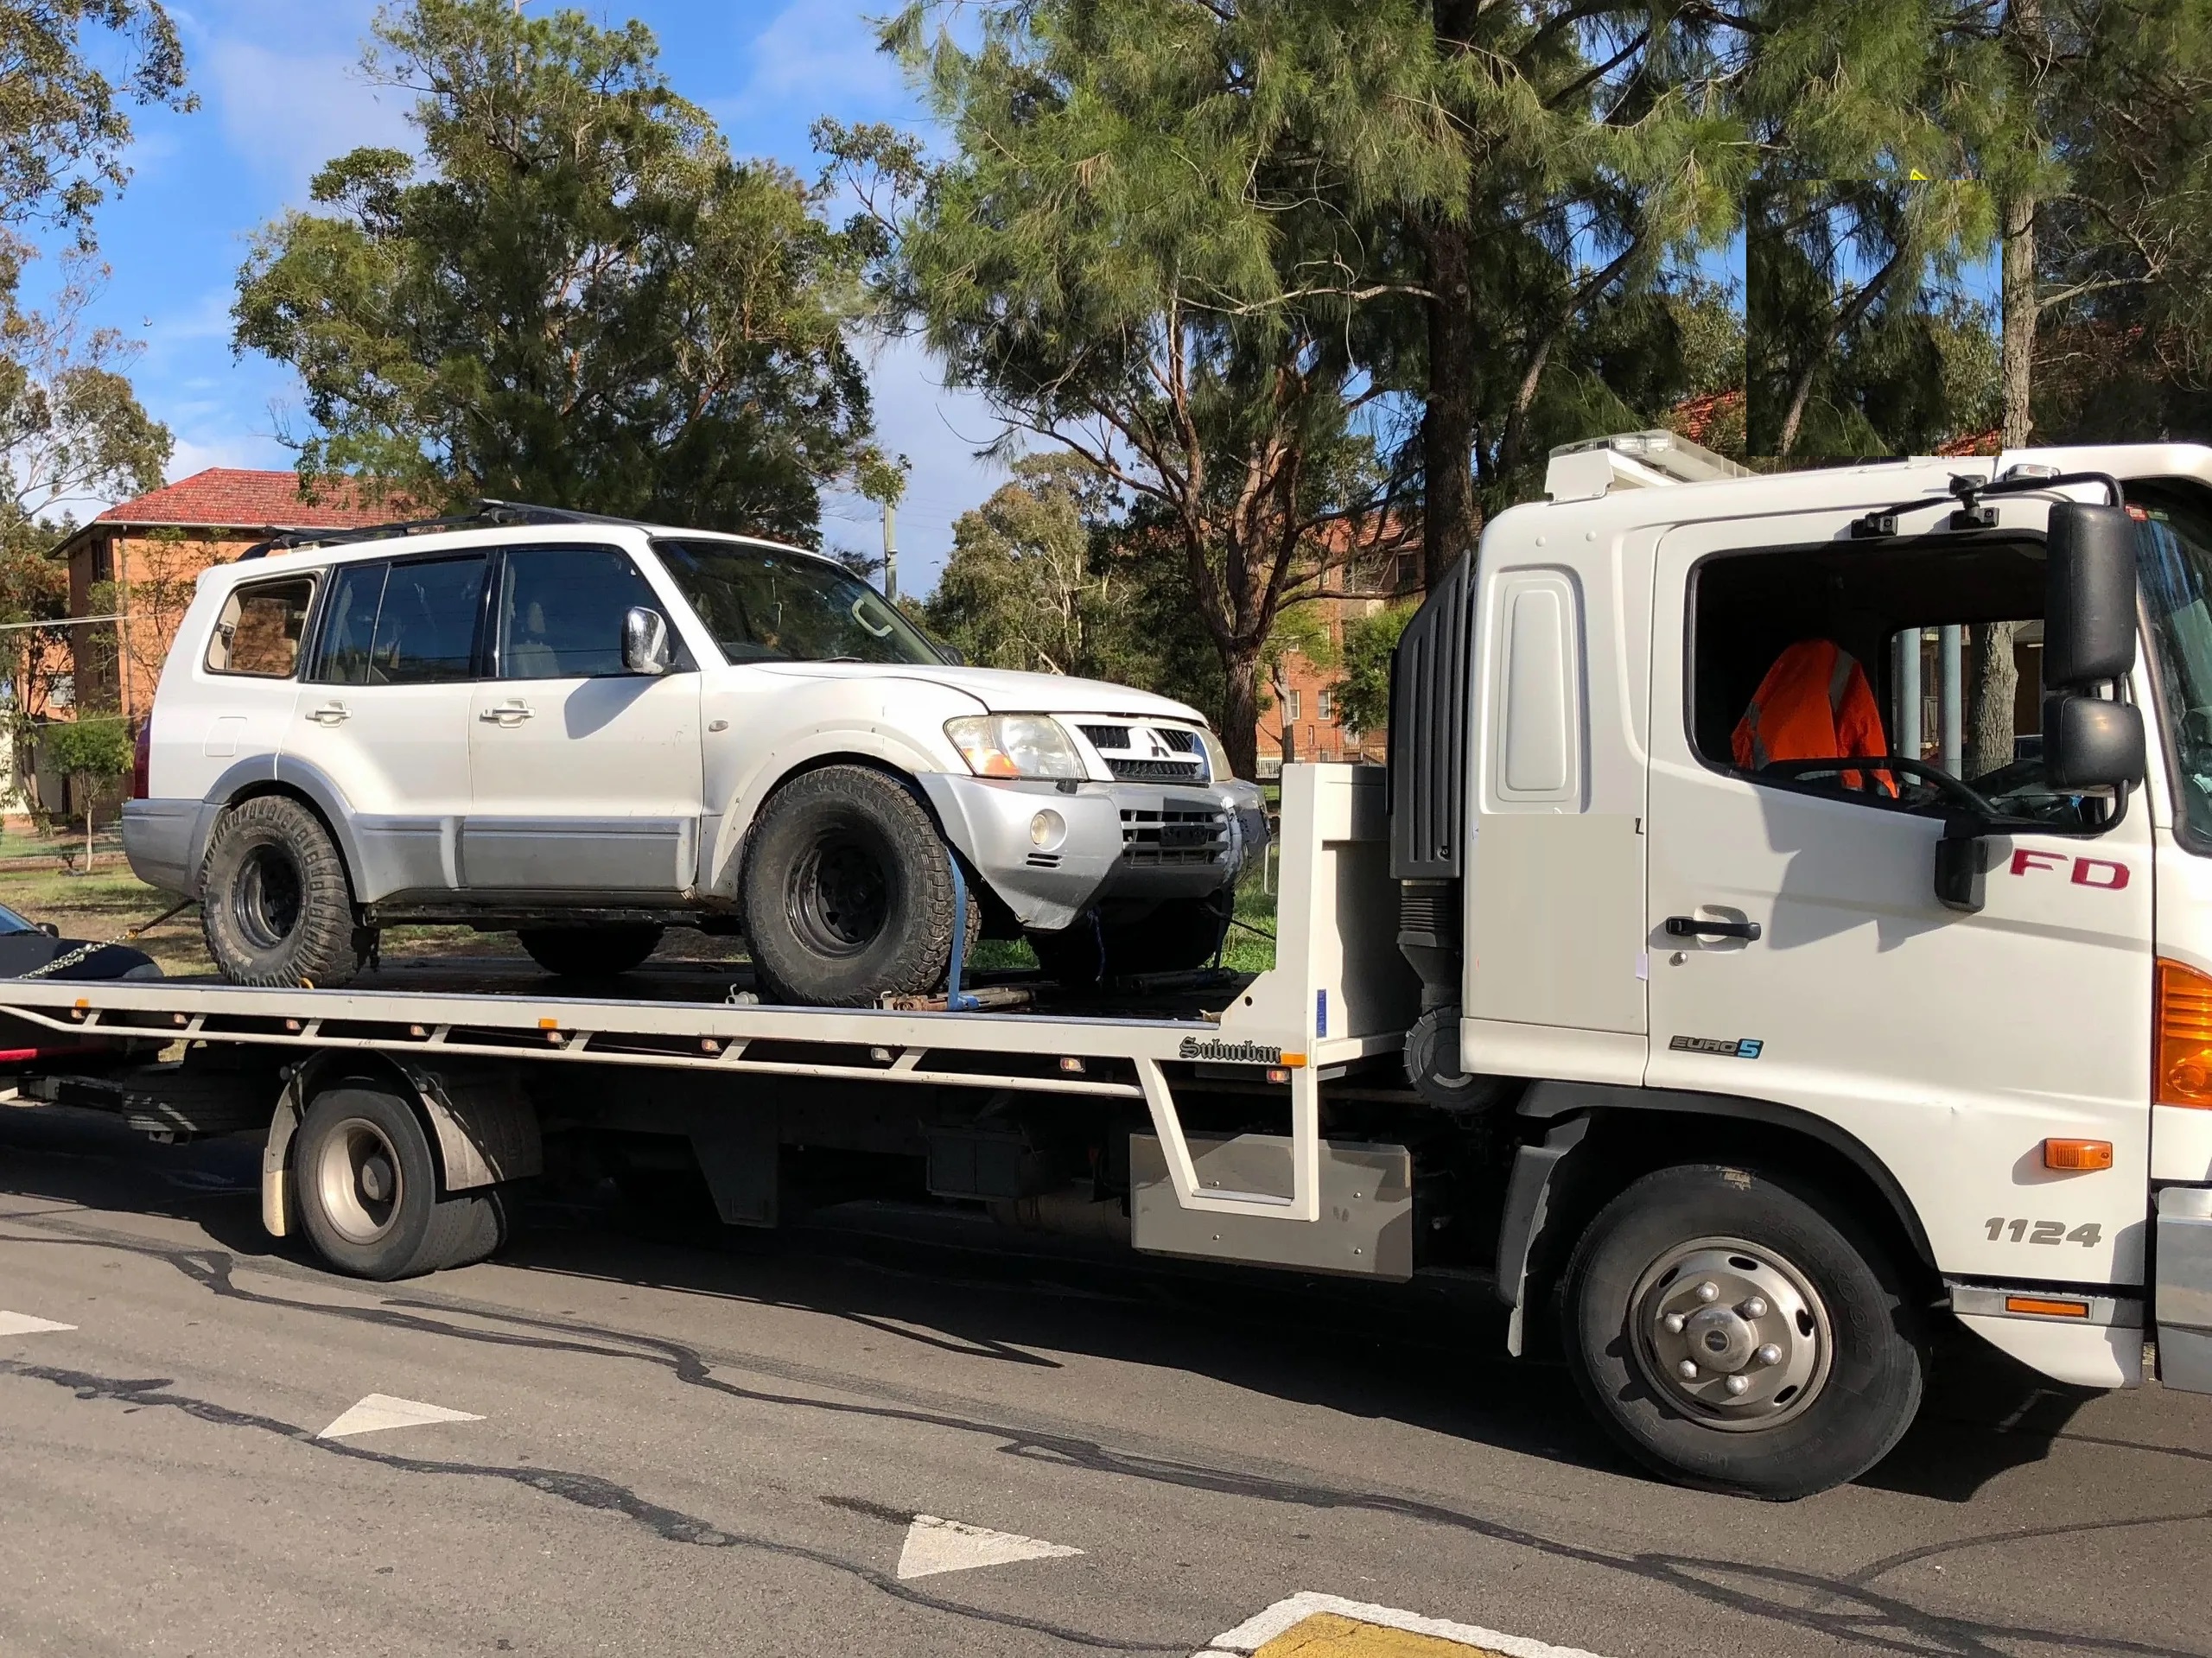 FREE CAR REMOVAL JANDAKOT CASH FOR CAR NOW, offers you free car removal at Jandakot suburb of WA. Our removal service is a car removal service that gives you cash by taking your unwanted cars. If you are tired of your old car and you have no time for advertising for selling it, then contact us. We will come to your doorstep to buy your car and pay for your car on the spot. If you have old cars, scrap cars, rusty cars, and accident cars and so on, keeping extra space in your garage and you don’t have much time to get it repaired. Also no one is agreed to buy it in such conditions, then you do not have to worry because we can buy these kinds of cars and pay you top cash. Also we offer you free car removal. We have our pickup trucks to pick your vehicles. If your car is not running or you do not have your car key with you, it is not a big problem because these issues will not prevent us from picking your unwanted cars. No matter whether your car is registered not registered. We can pick up any car in any condition. Do not forget our service is free for all customers. Kindly fill the online form for your car or call us: Contact: 0434150332